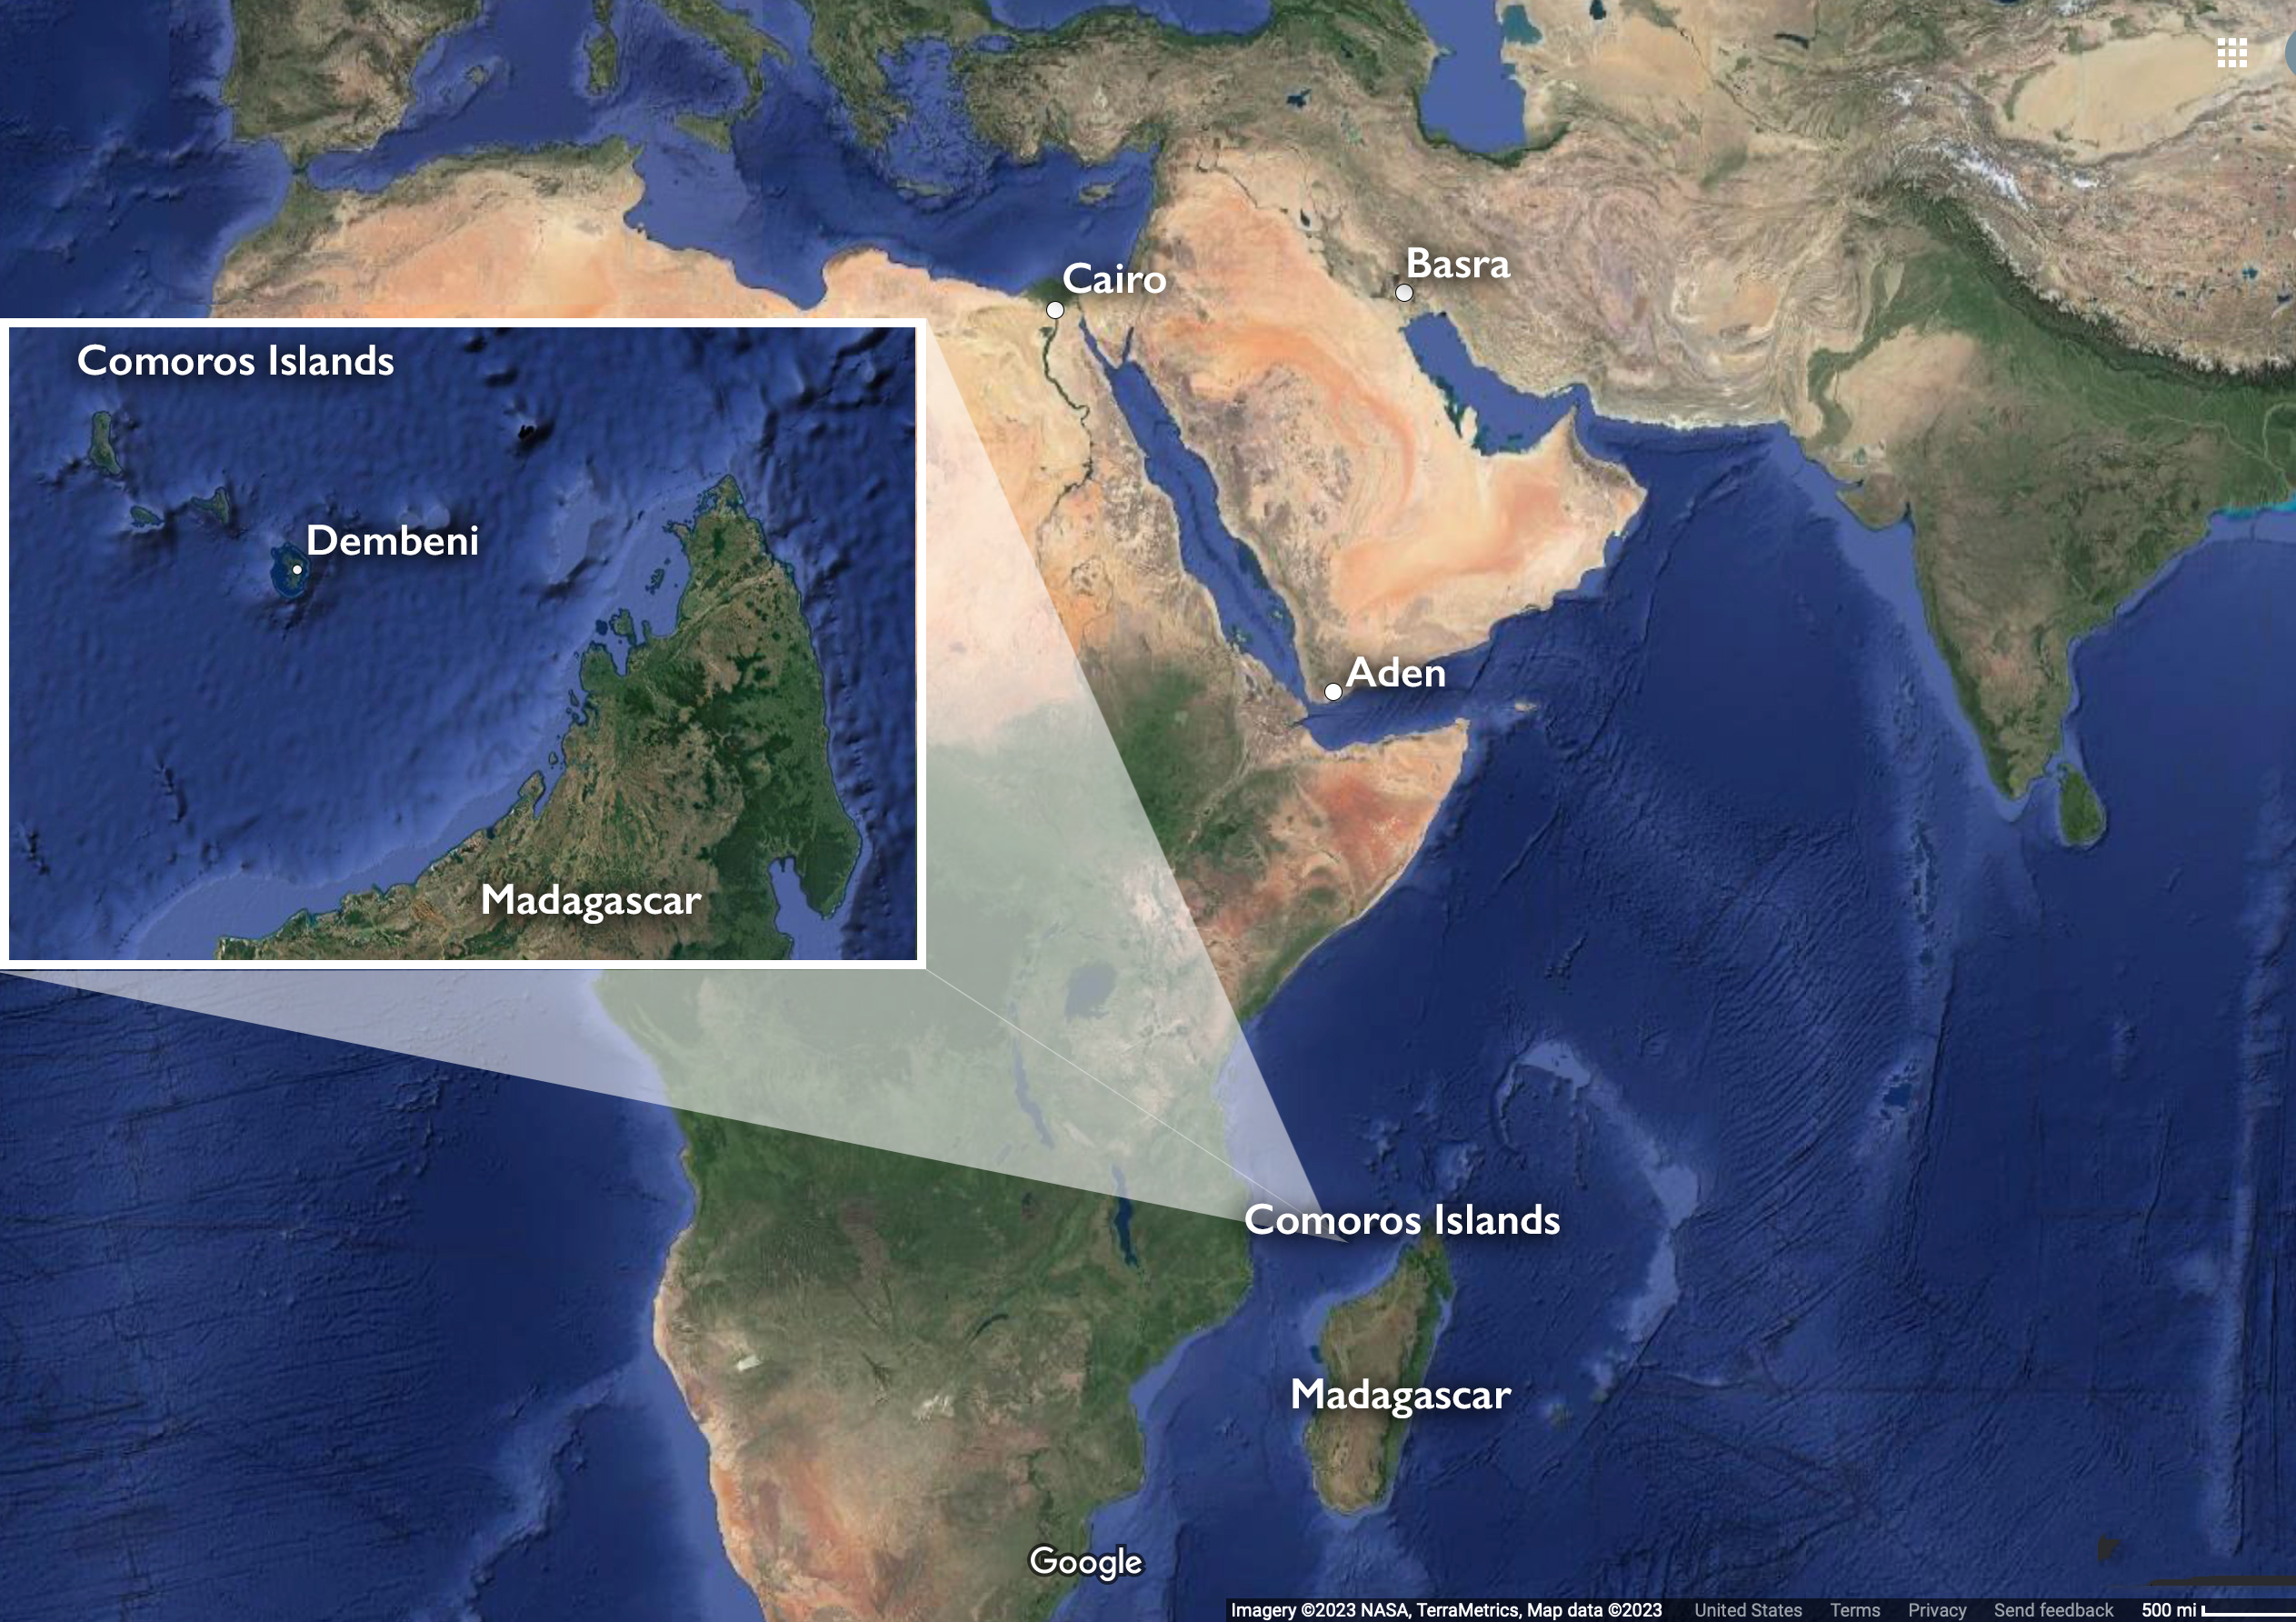 Rock crystal trade across West Asia, North Africa, and East Africa (underlying map © Google)